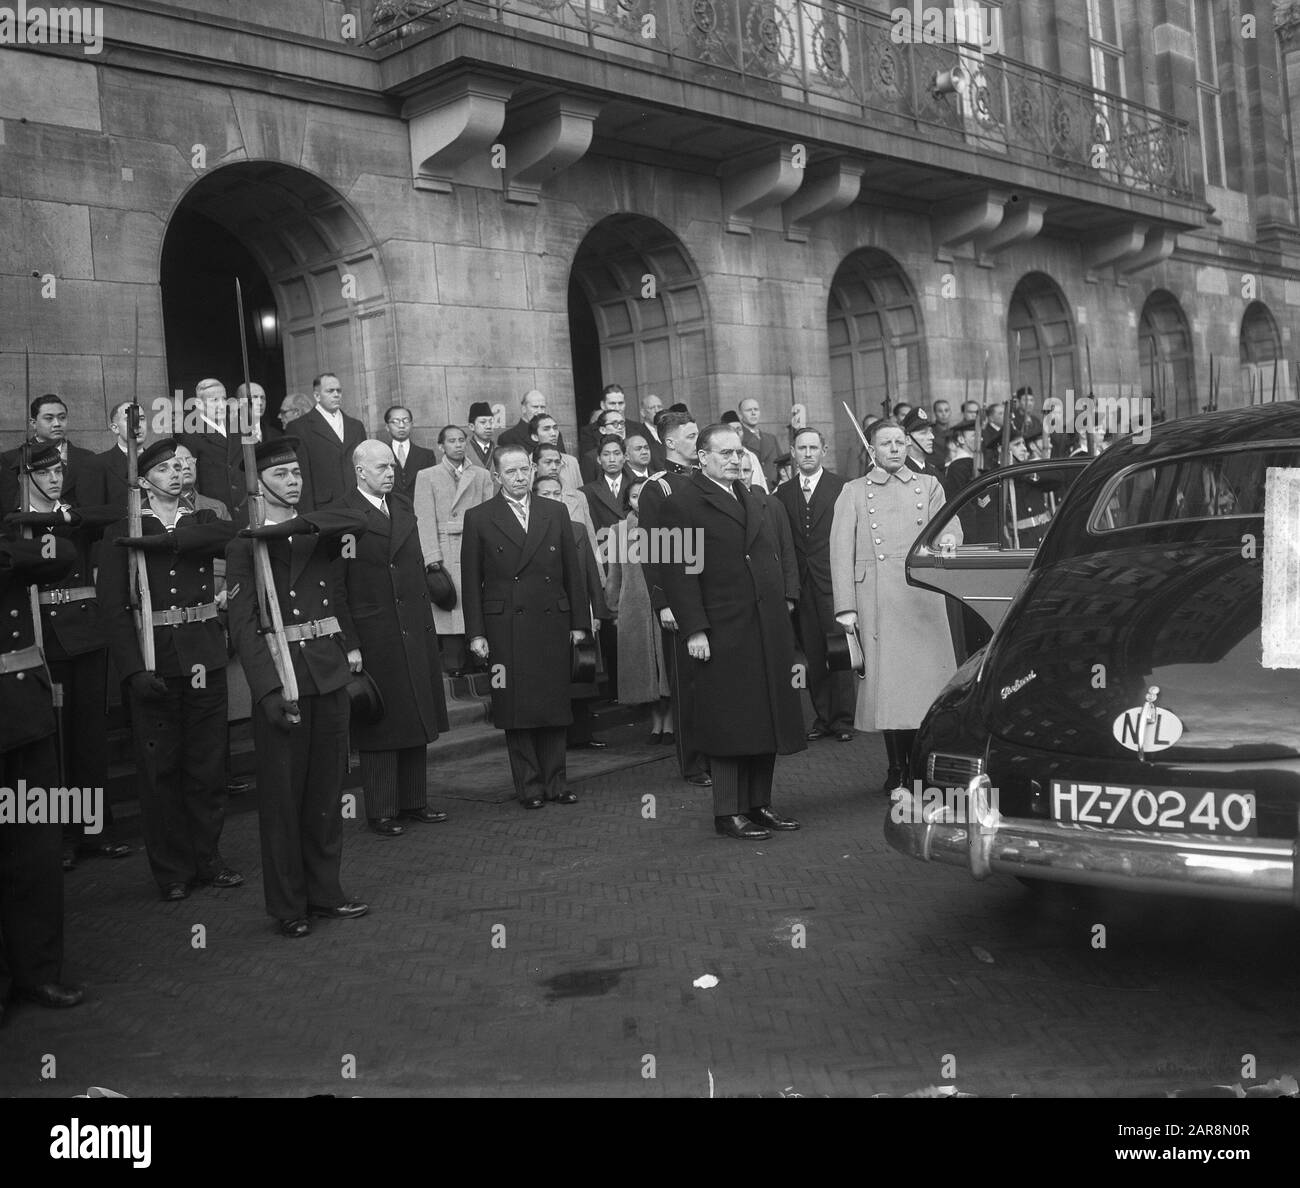 Transfer of sovereignty to Indonesia at the Royal Palace on Dam Square. Prime Minister Willem Drees departs Date: 27 December 1949 Location: Amsterdam, Noord-Holland Keywords: international agreements Personal name: Drees, Willem (sr.) Stock Photo